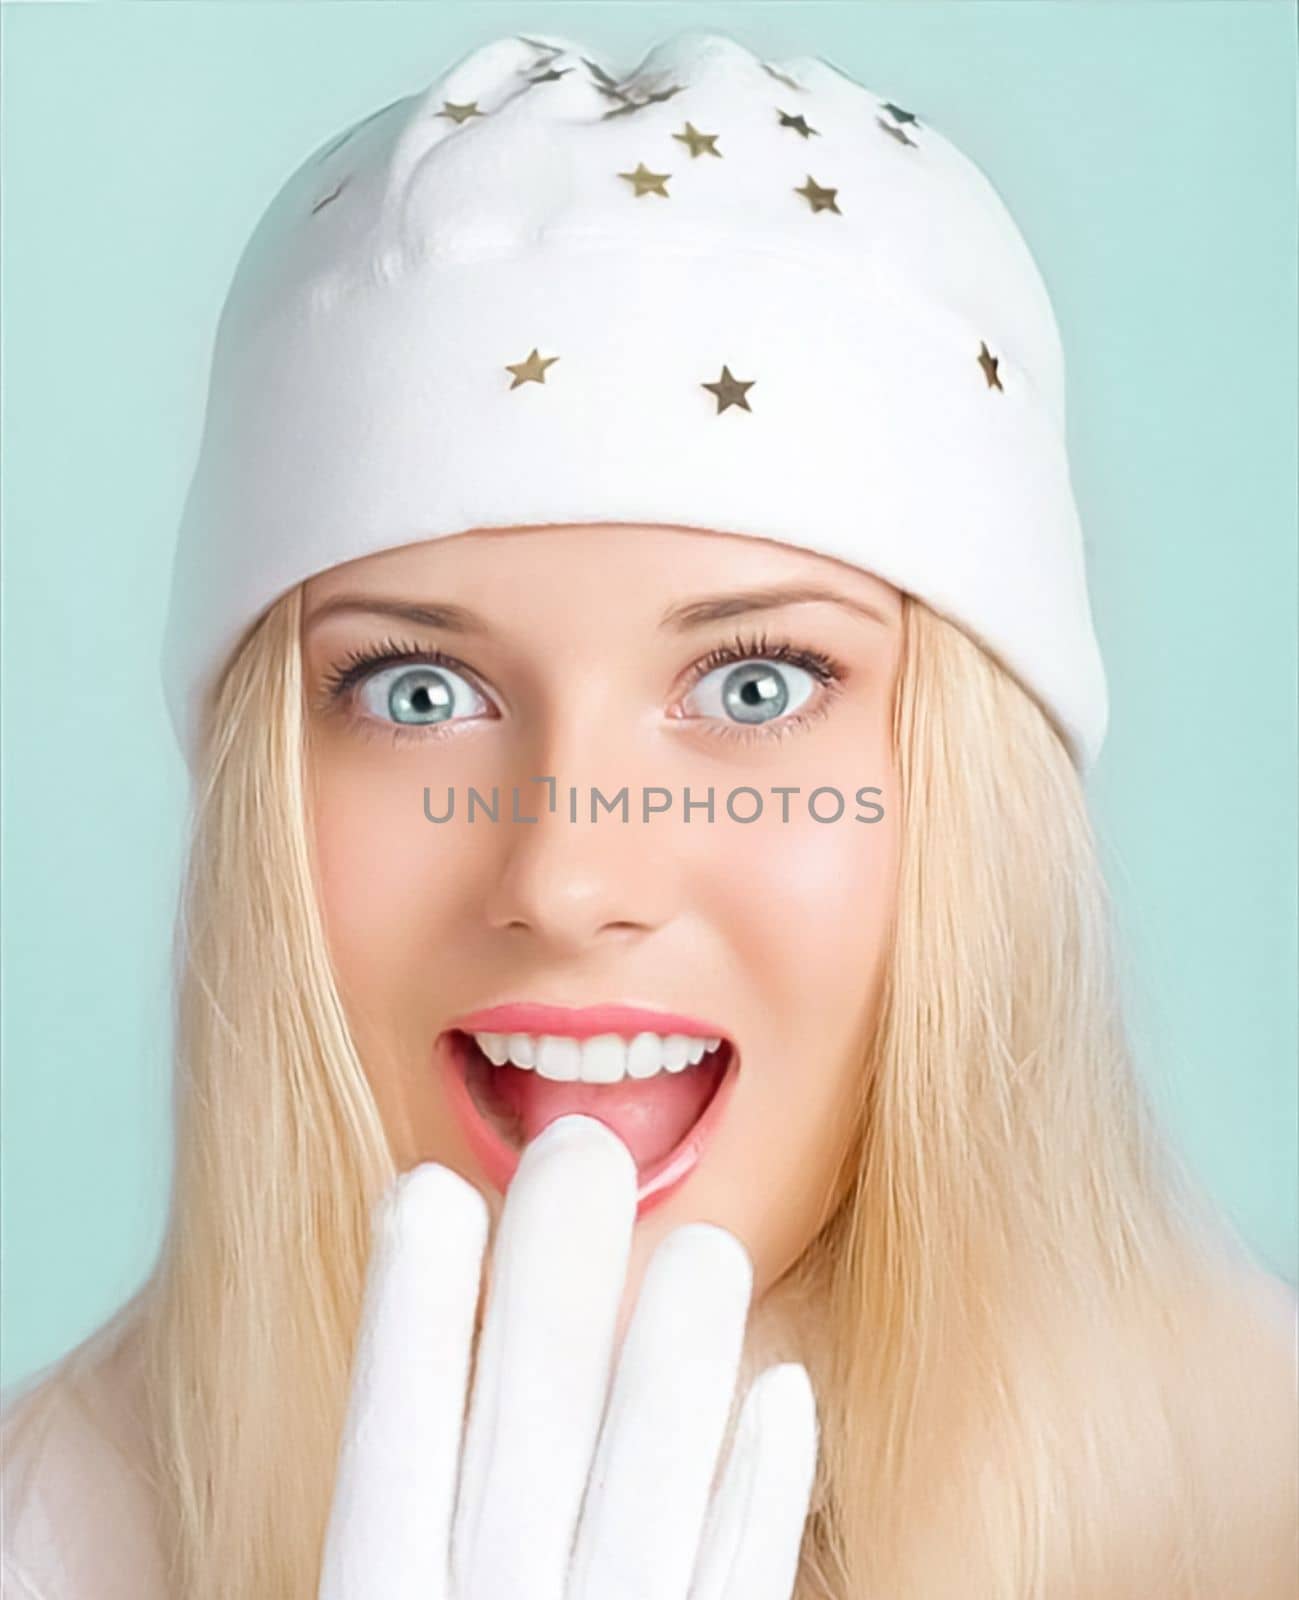 Merry Christmas, happy holidays and woman wearing white hat and gloves. Festive celebration, beauty and fashion female model on green background. Surprised funny blonde girl smiling and enjoying Christmas, New Year and winter holidays lifestyle.